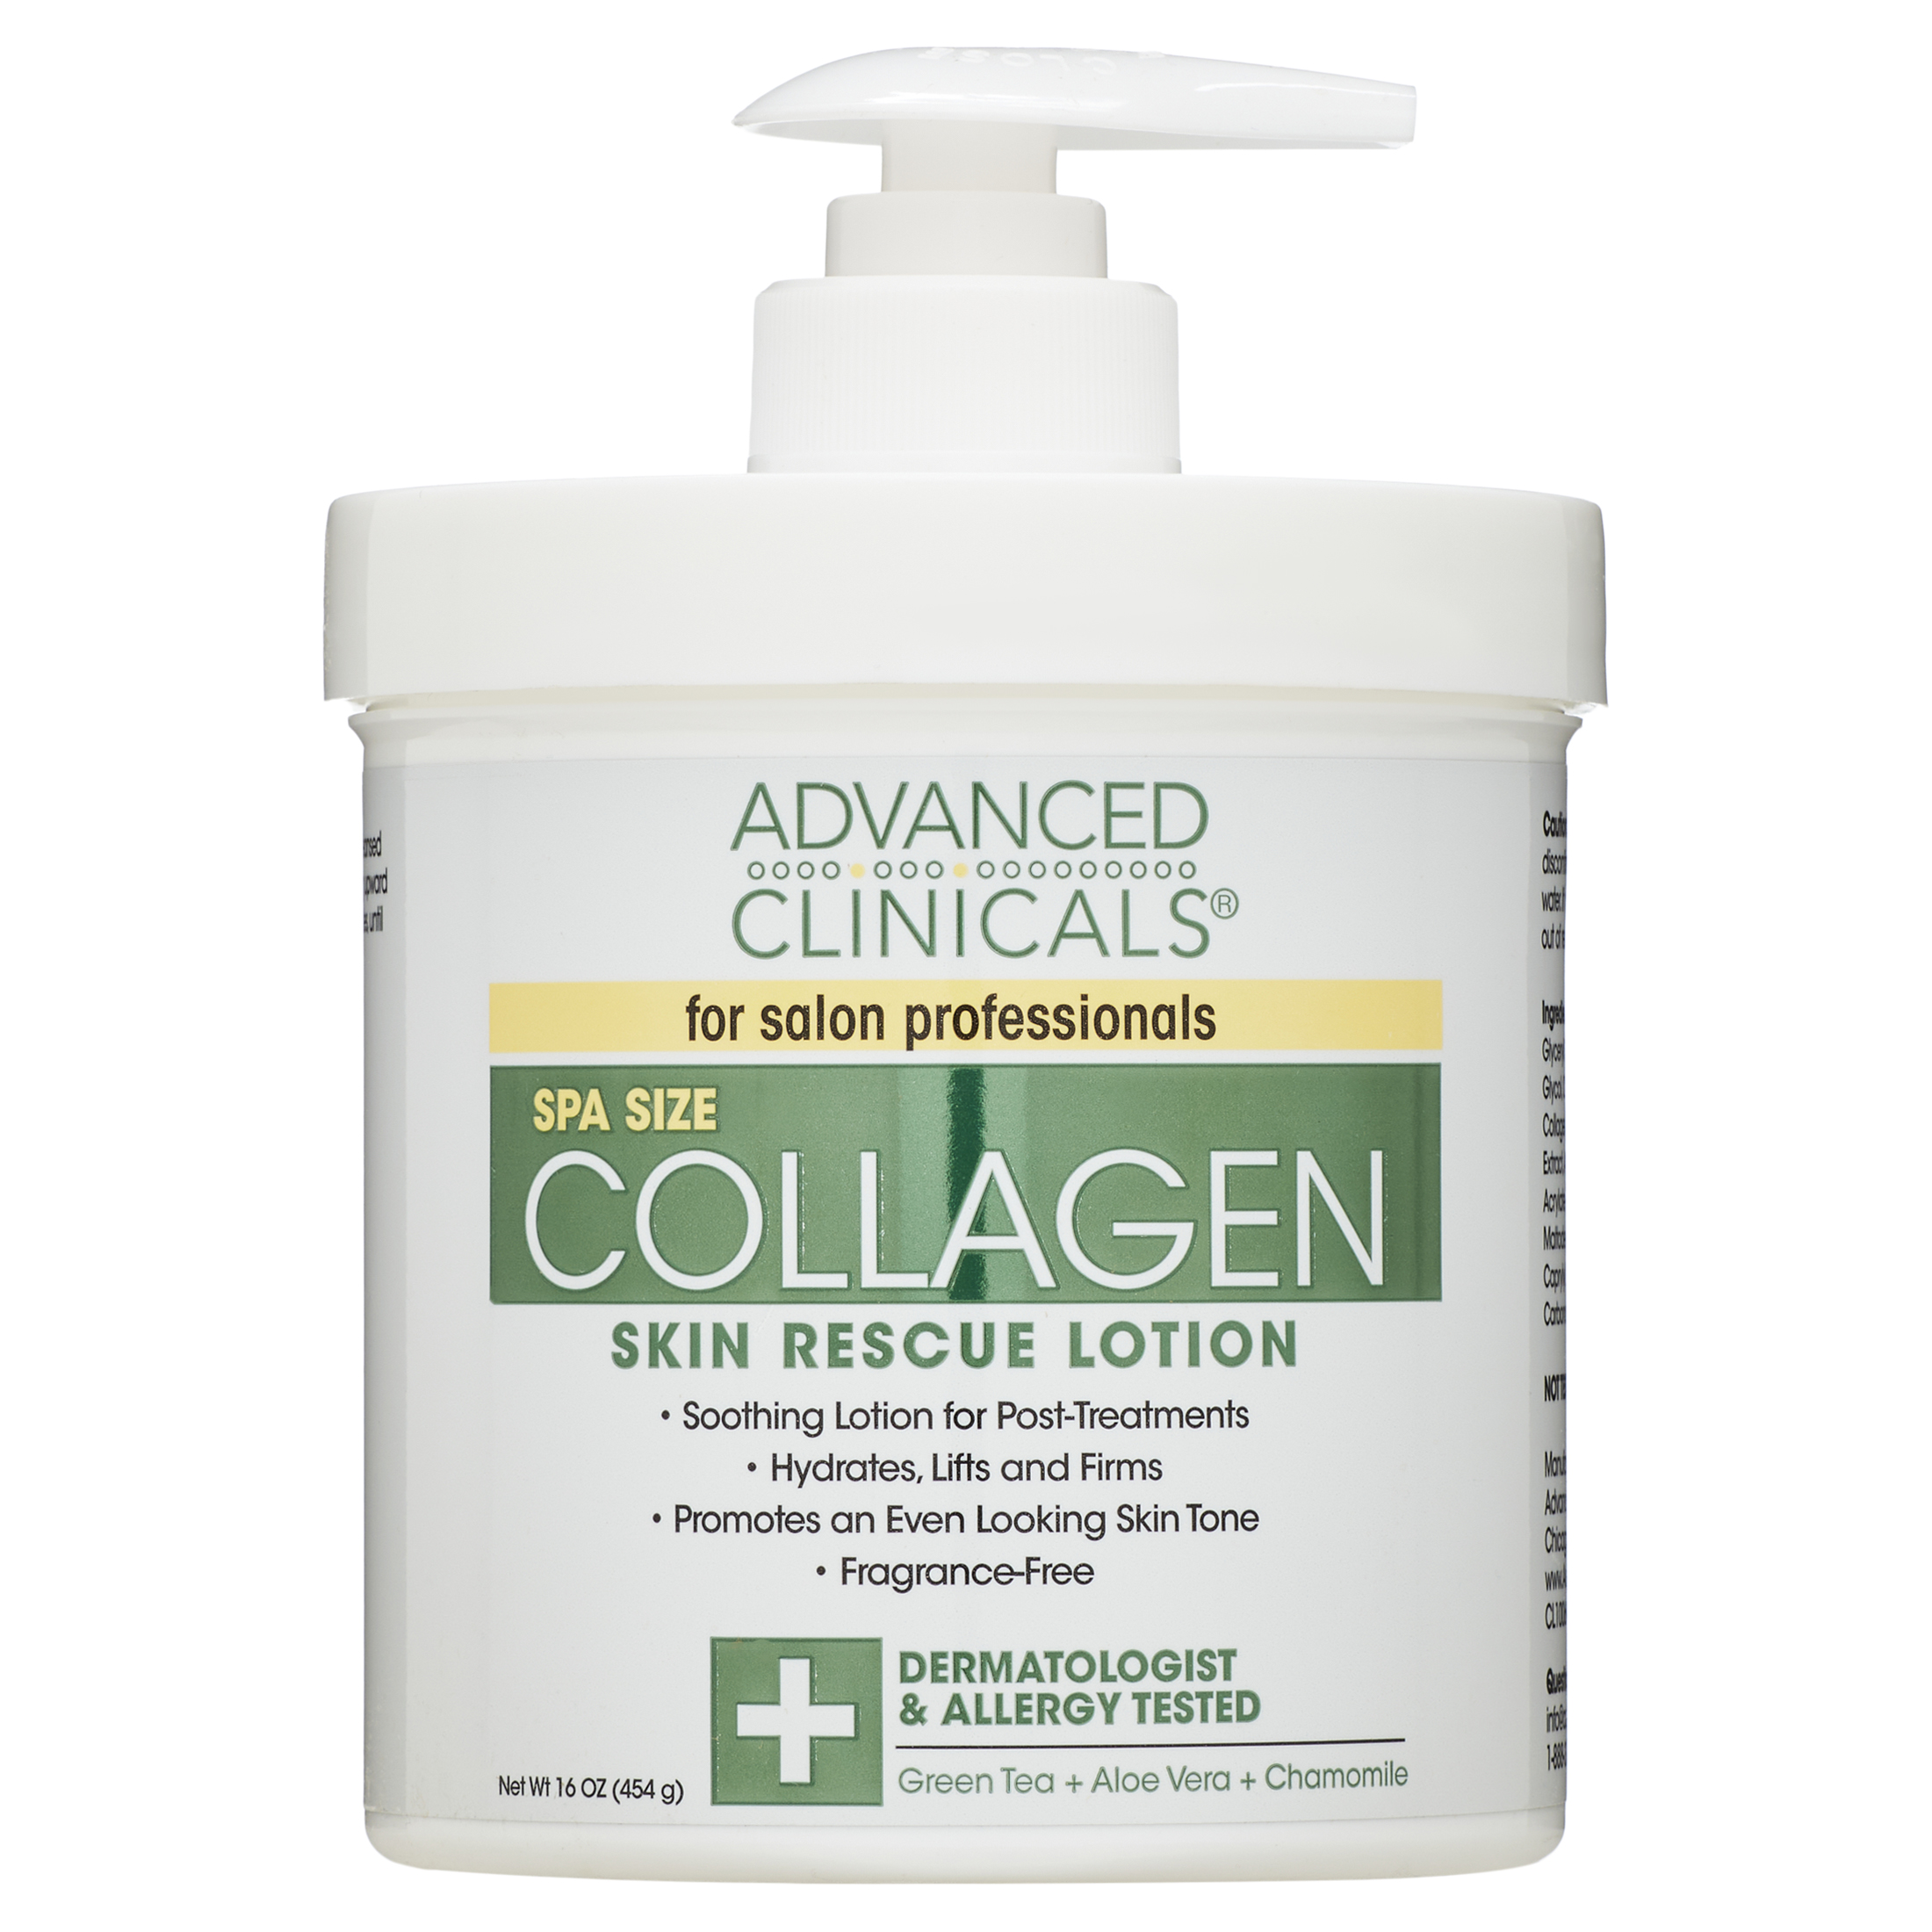 Advanced Clinicals Collagen Skin Rescue Lotion. Hydrating Body Cream for Hands, Face. Dry Skin Treatment. 16 fl oz. - image 1 of 5